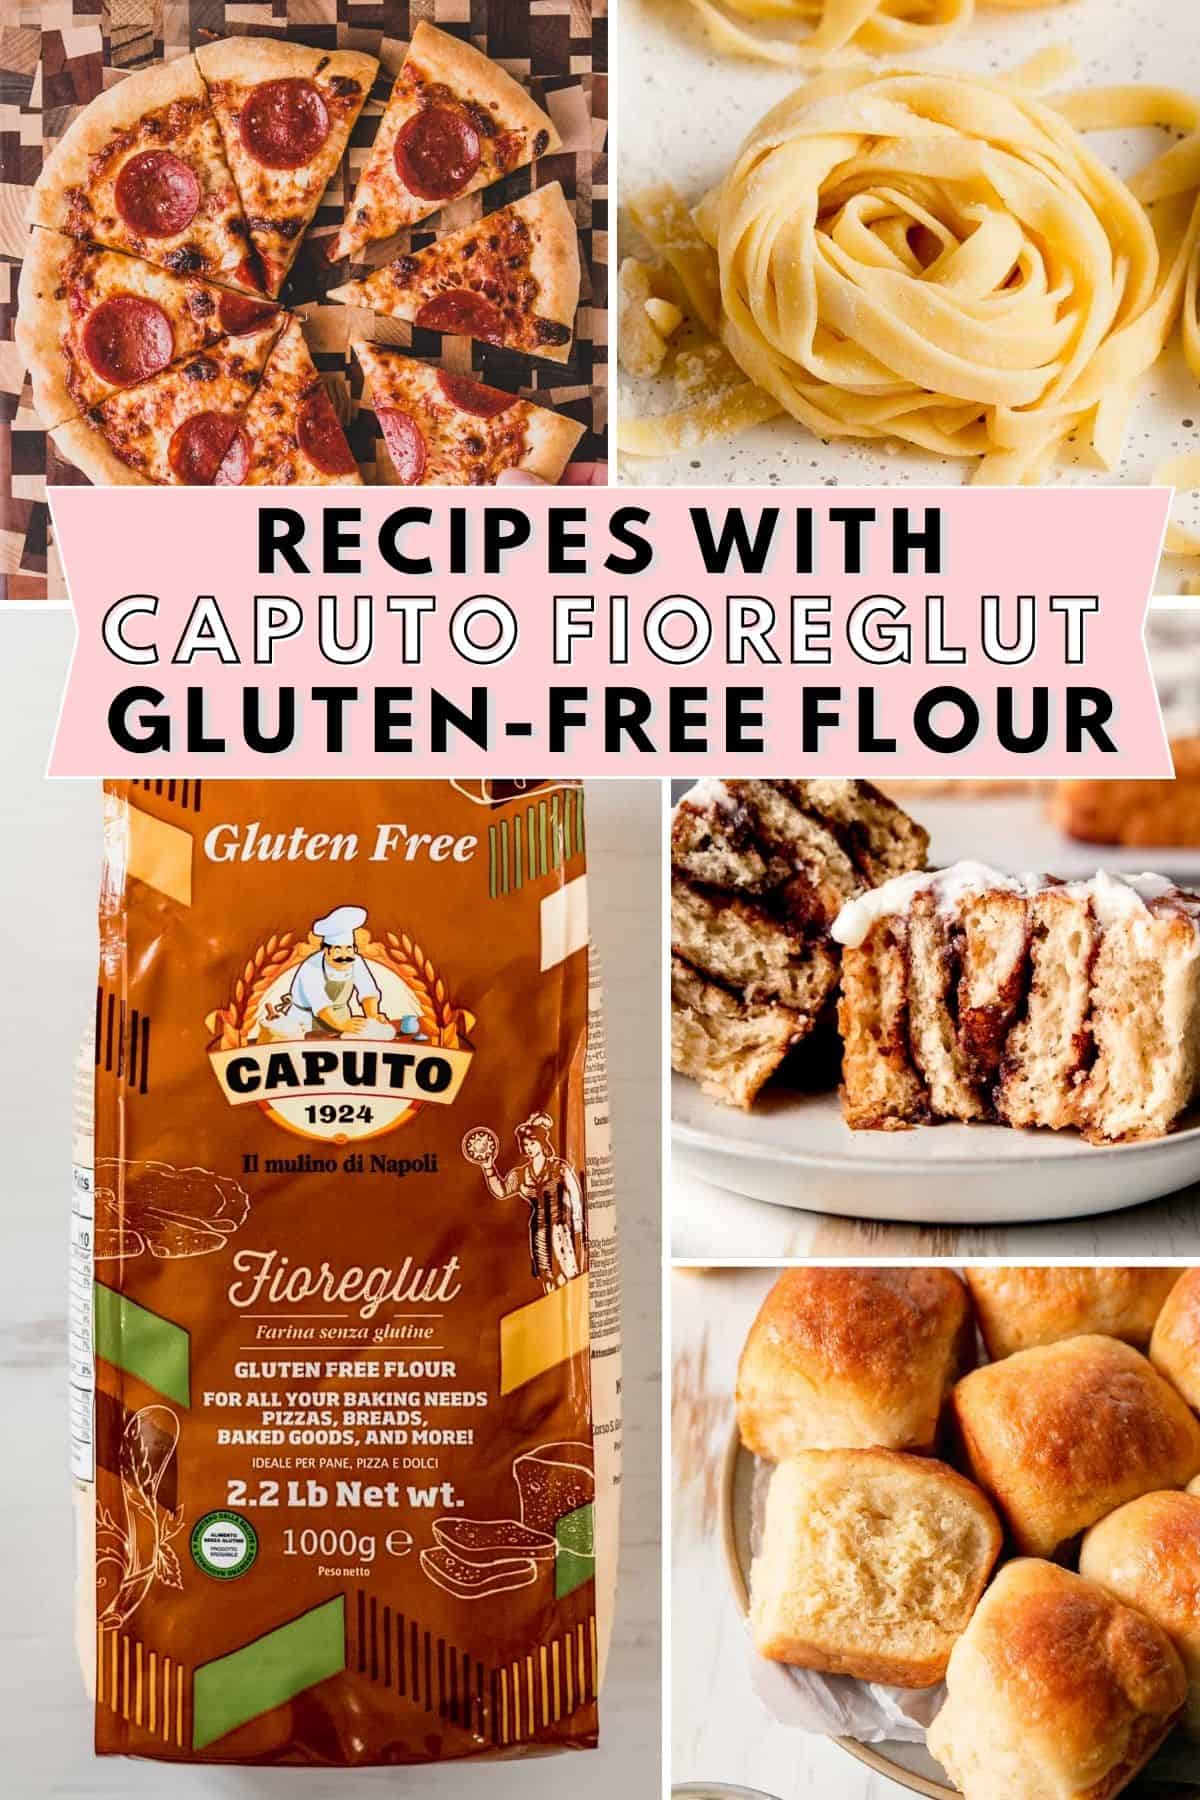 Image collage featuring a bag of Caputo Fioreglut and pizza, cinnamon rolls, pasta, and dinner rolls. Text overlay: Recipes with Caputo Fioreglut gluten-free flour.